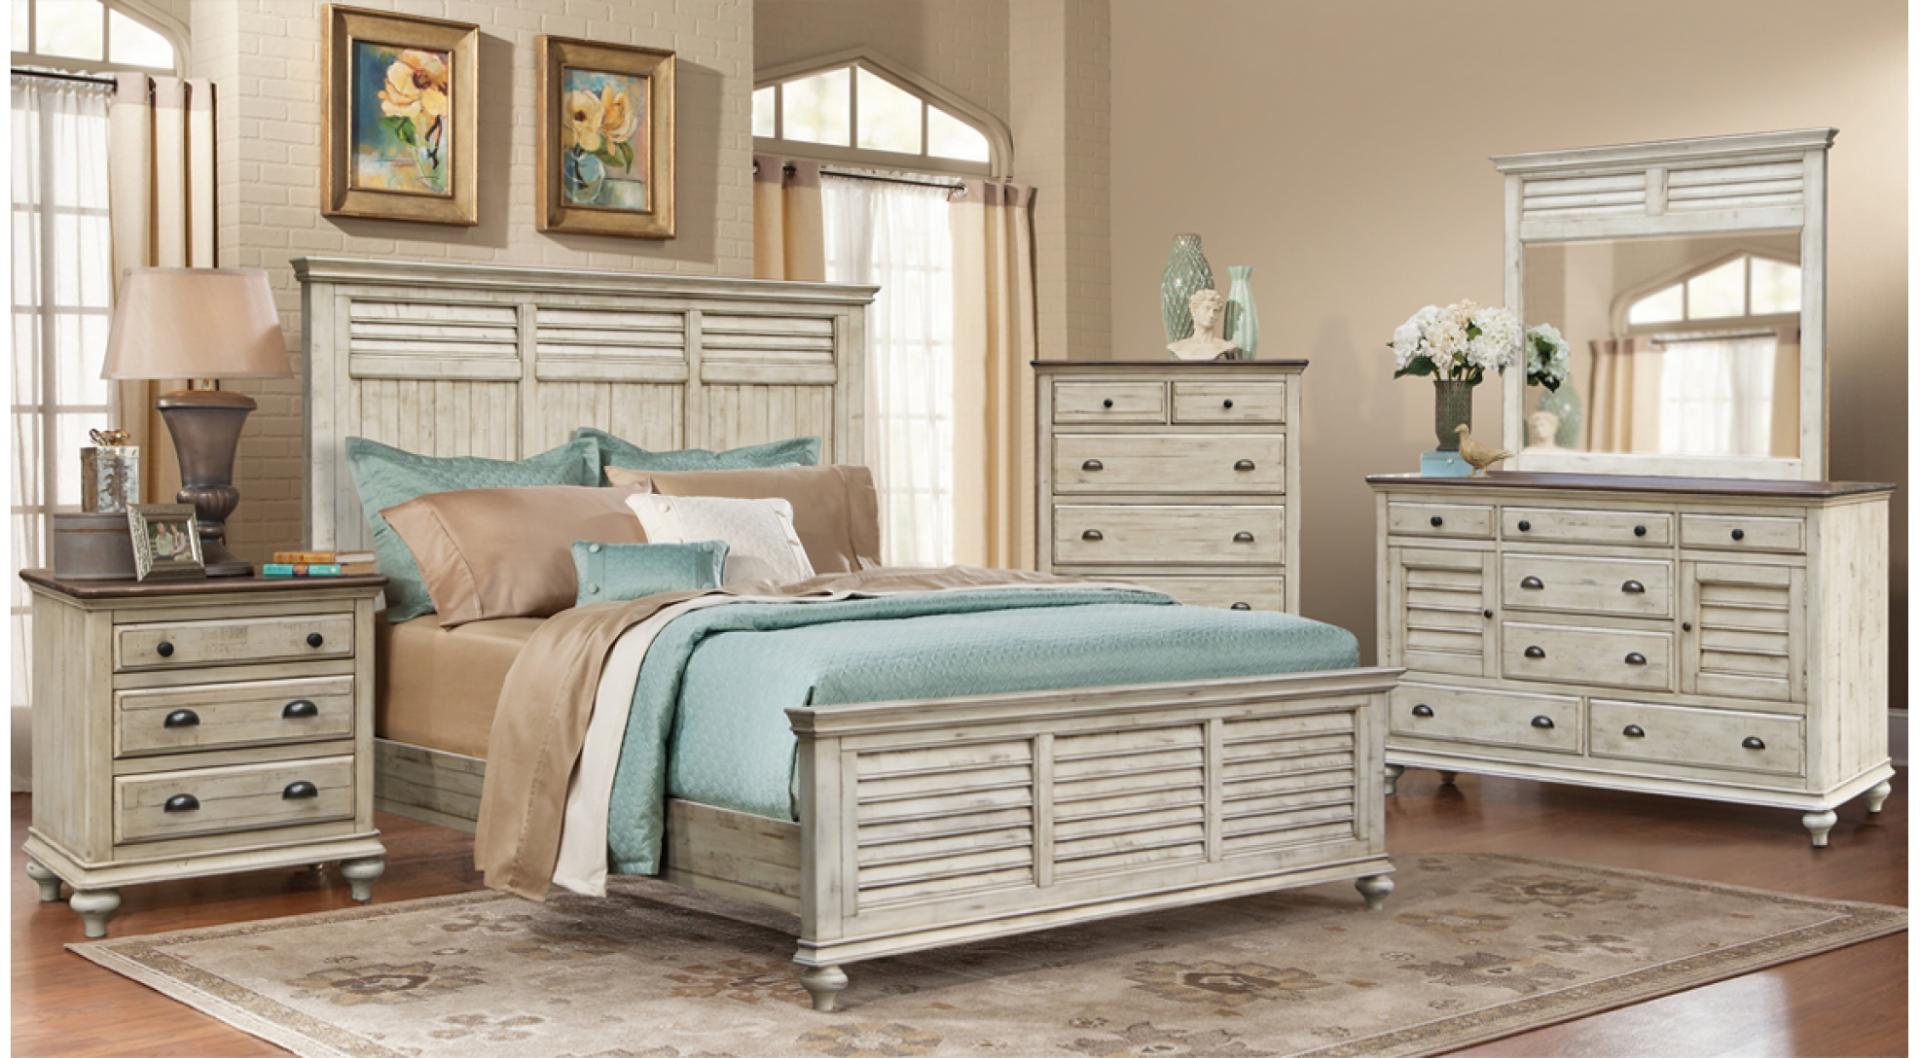 Reveal 63+ Awe-inspiring bedroom furniture melbourne cheap With Many New Styles